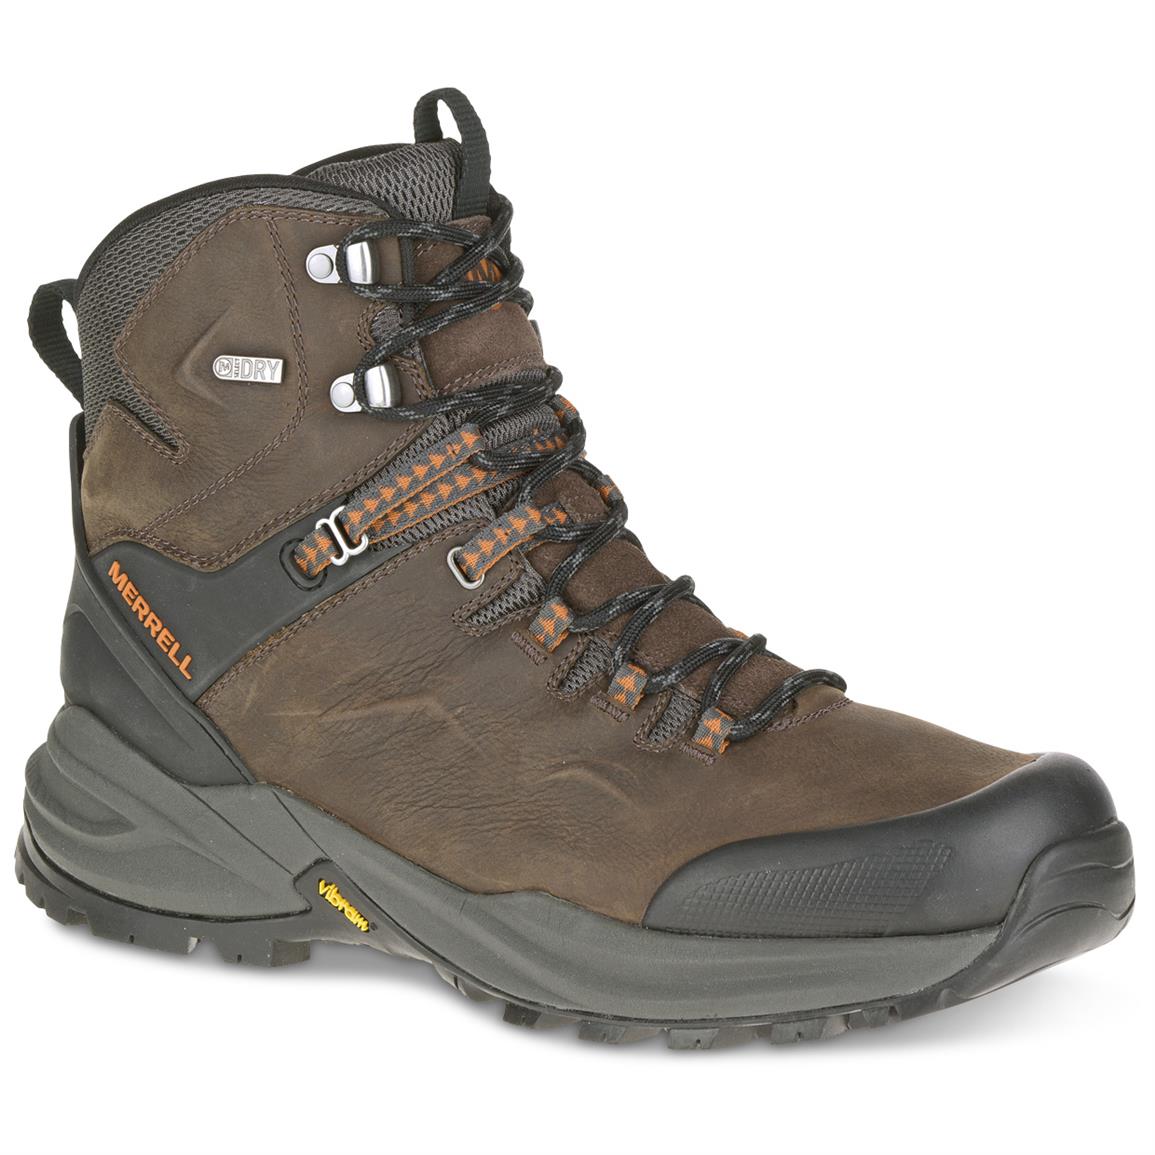 Merrell Men's Phaserbound Hiking Boots, Waterproof 